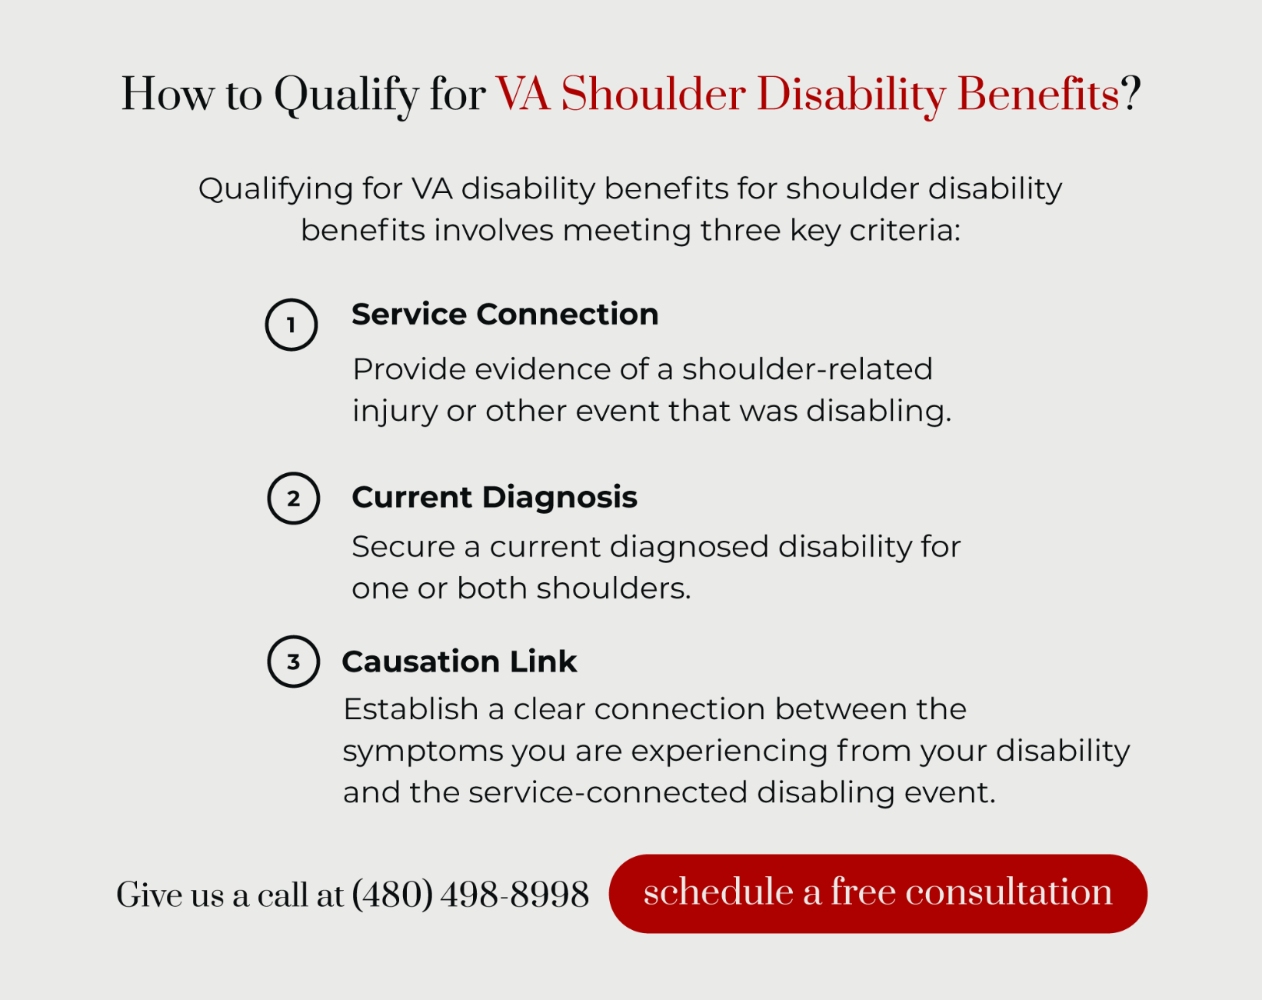 How to qualify for VA shoulder disability benefits